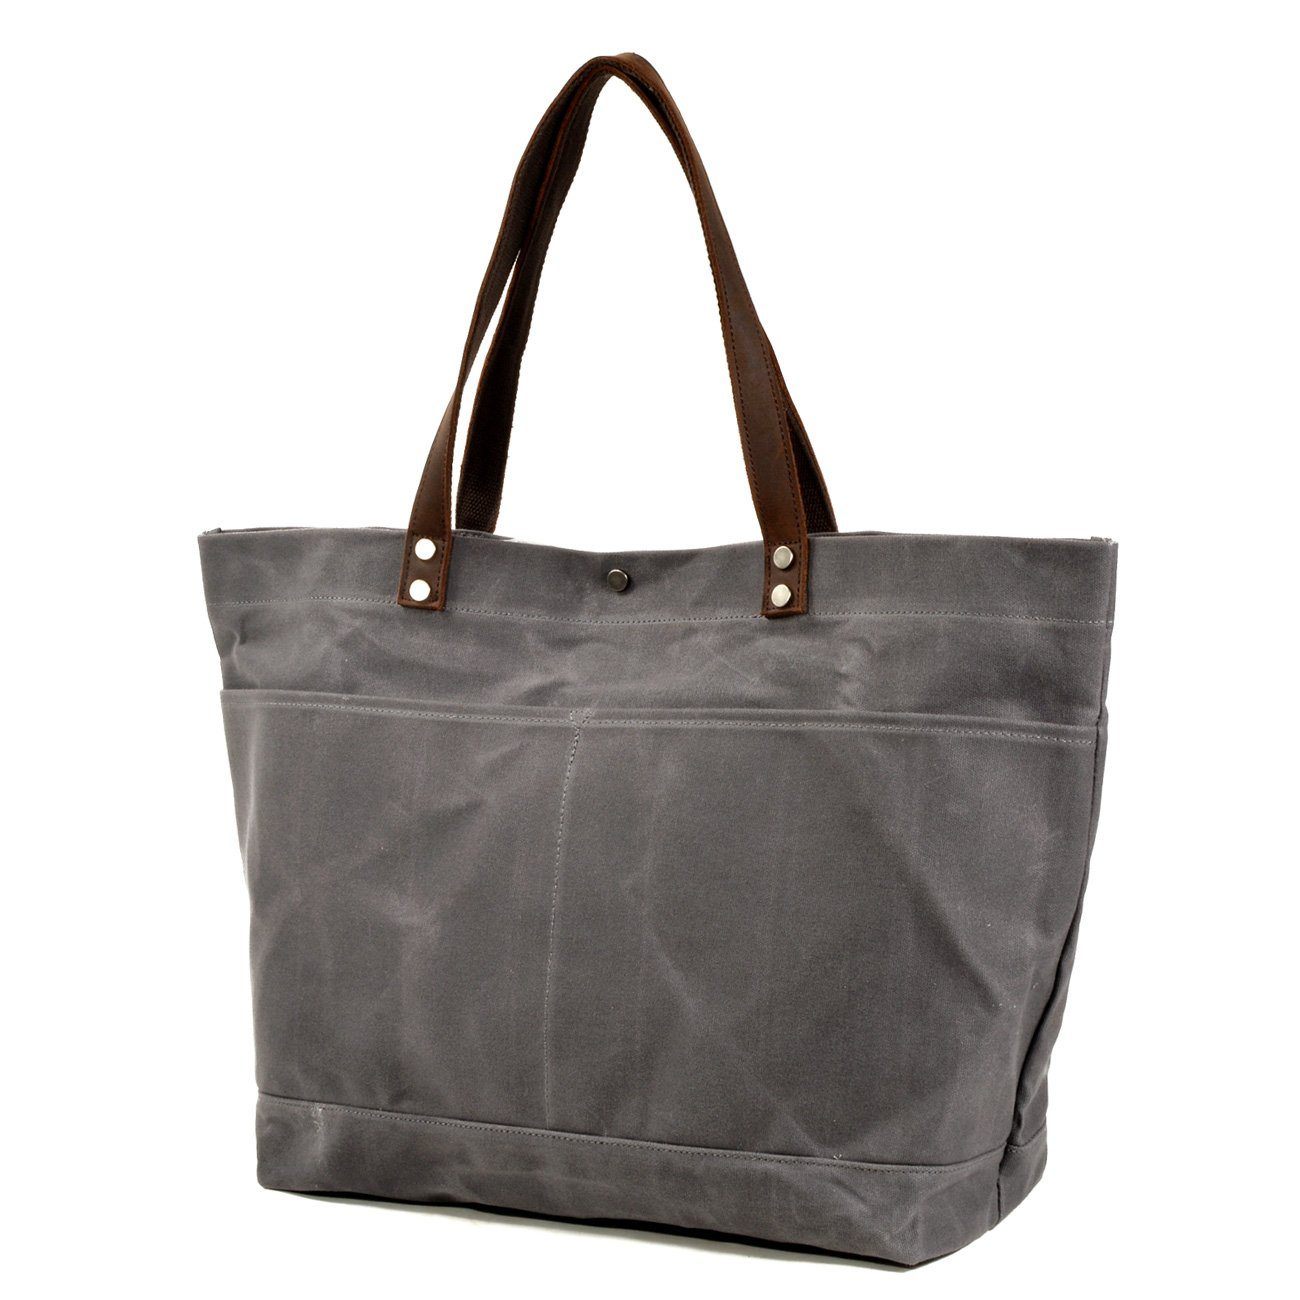 Waxed tote bag with short leather handle, extra thick leather